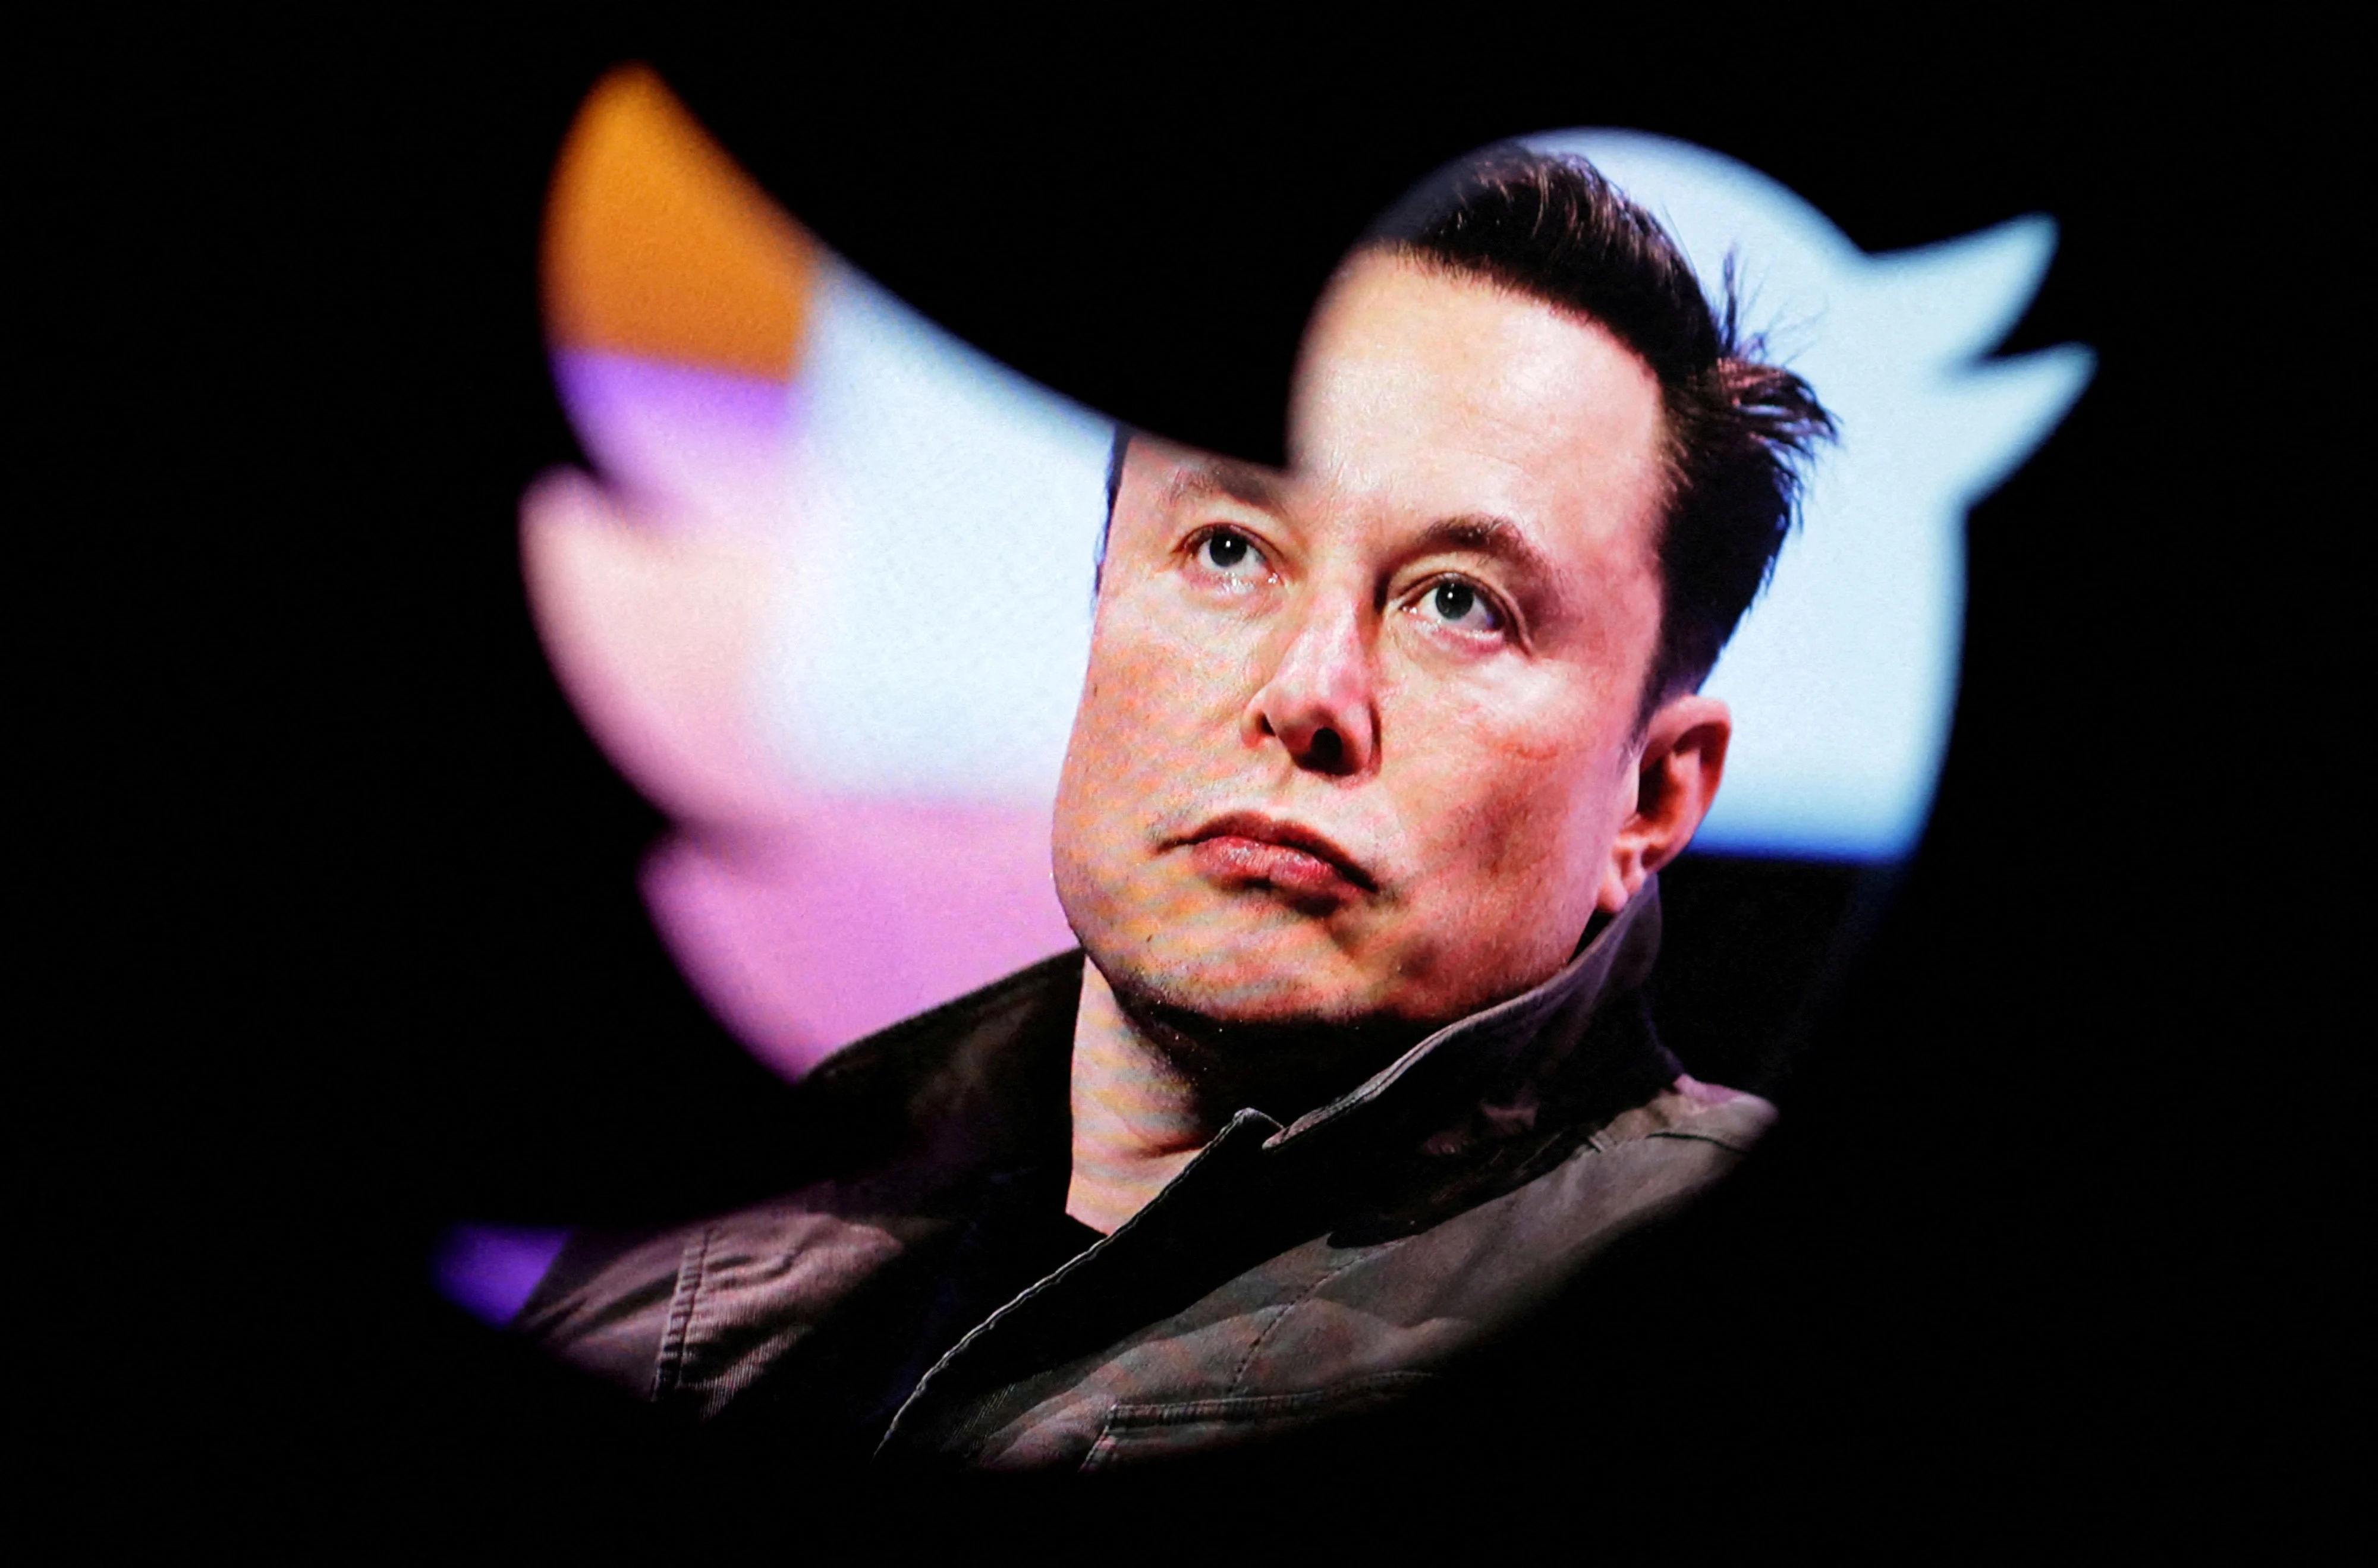 Elon Musk Implements “View Limit” on Twitter to Discourage Twitter Addiction